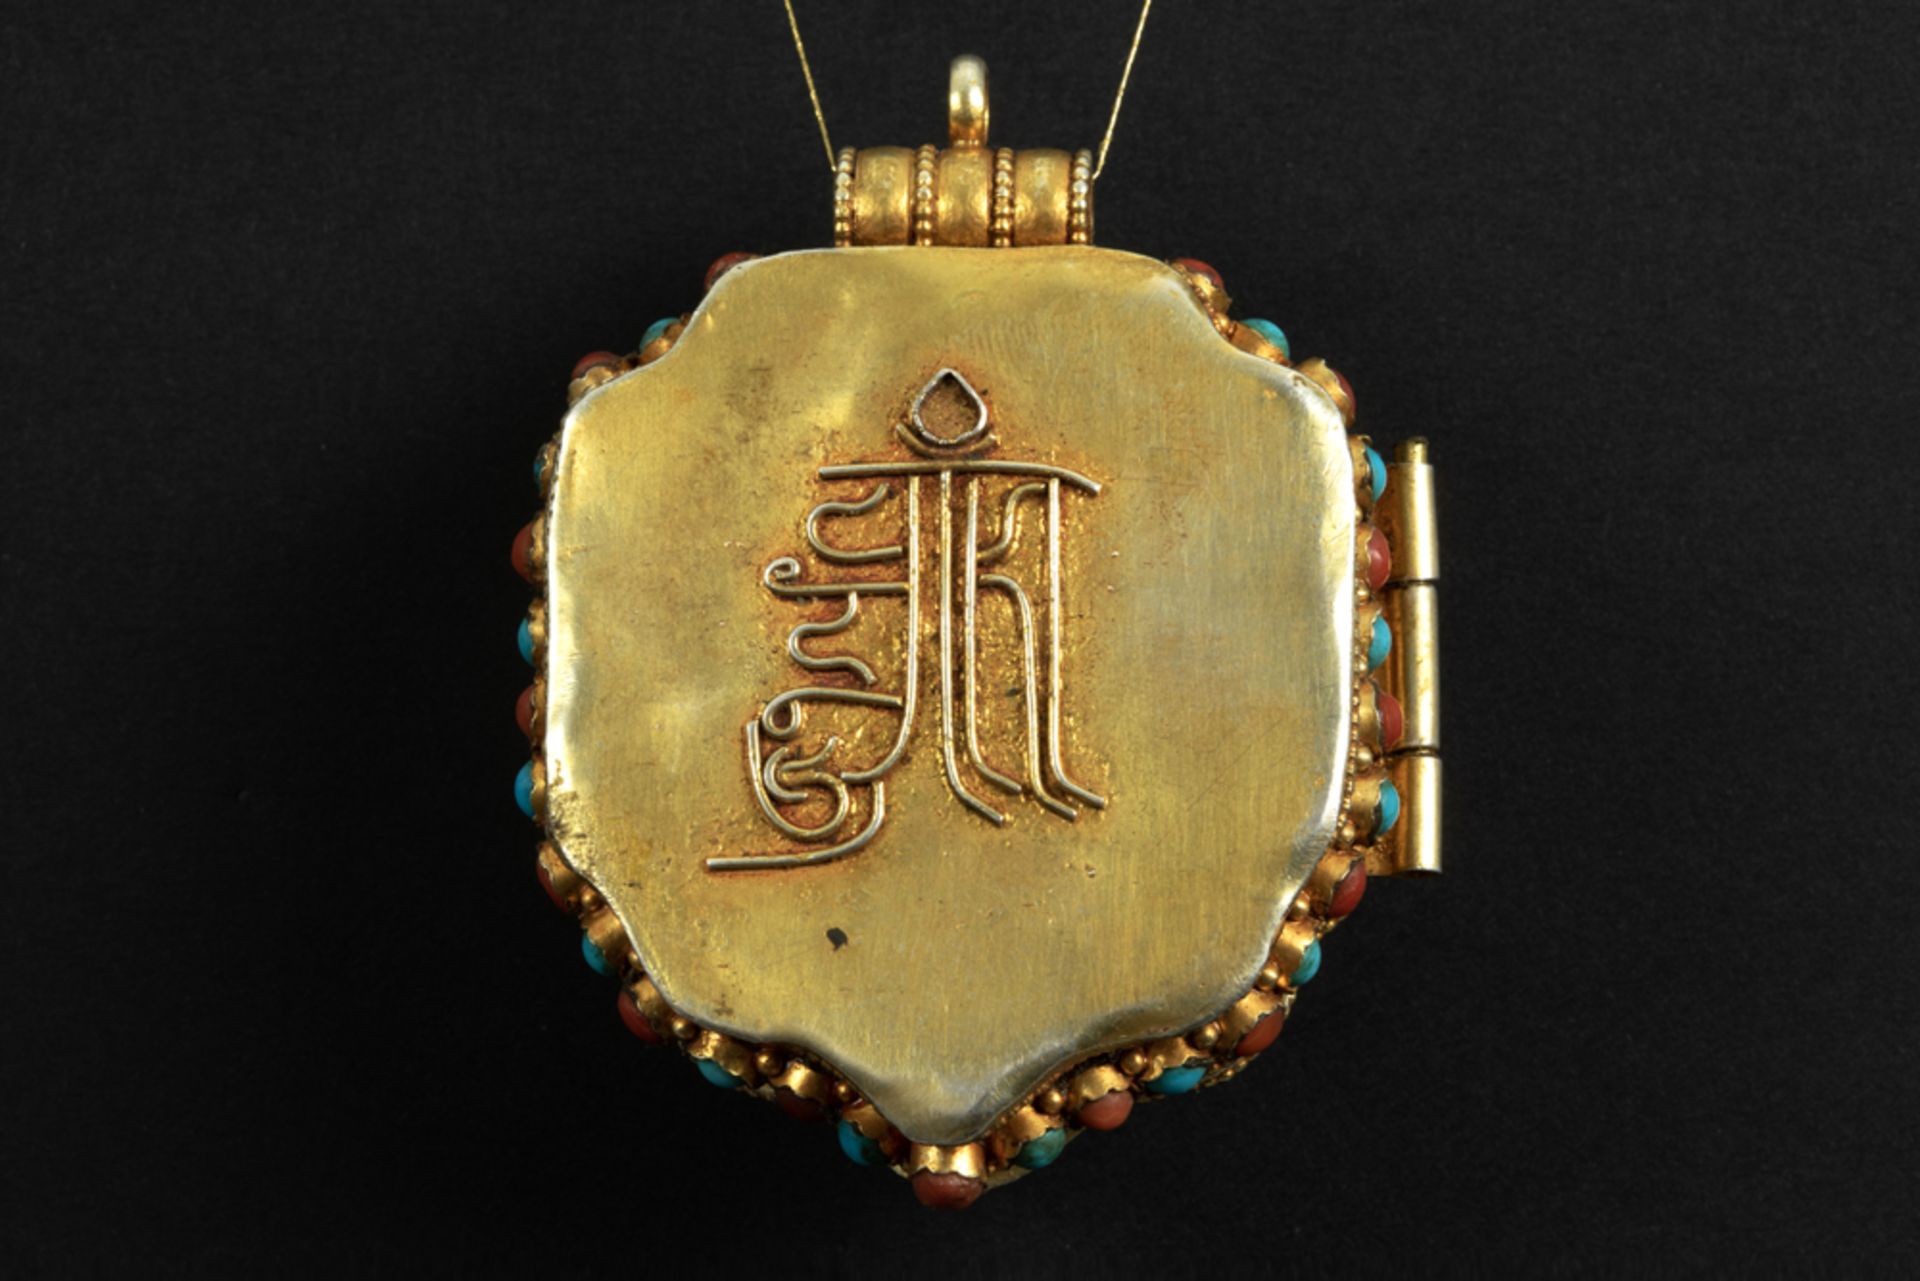 Tibeto Nepalese ghau in yellow gold on silver with turquoise, lapis lazuli and coral and with the - Bild 3 aus 3